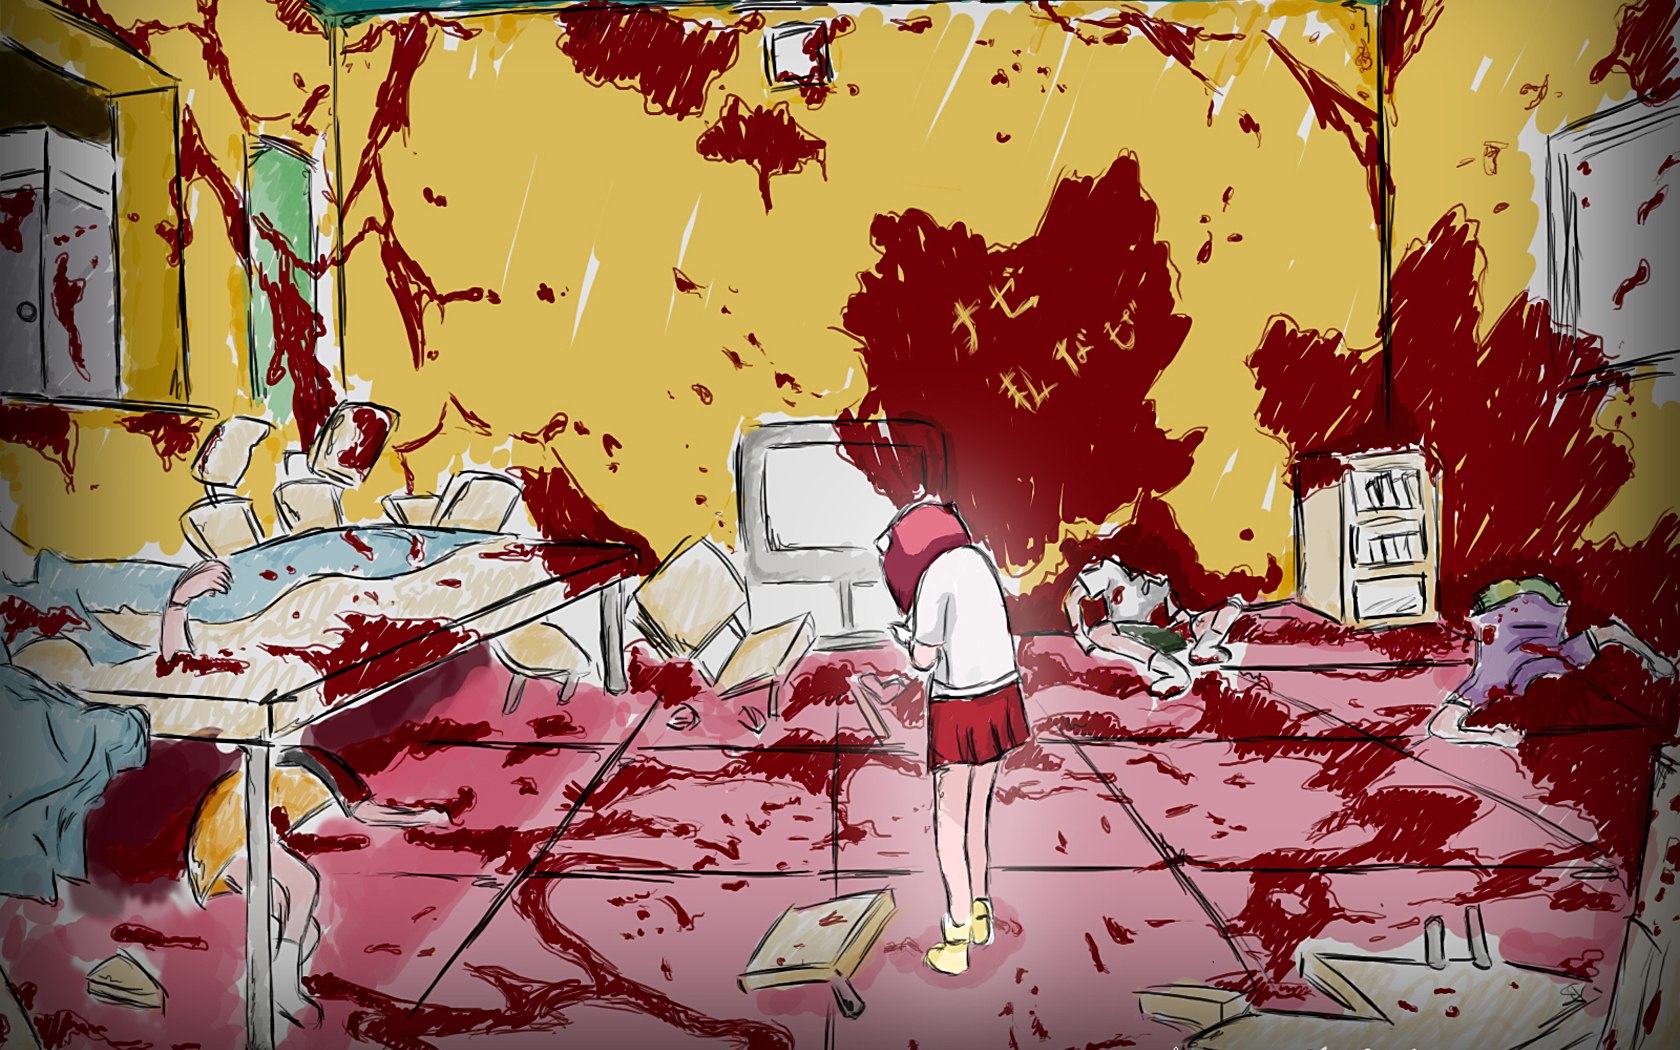 Elfen lied wallpaper 1680x1050 - High Quality and other